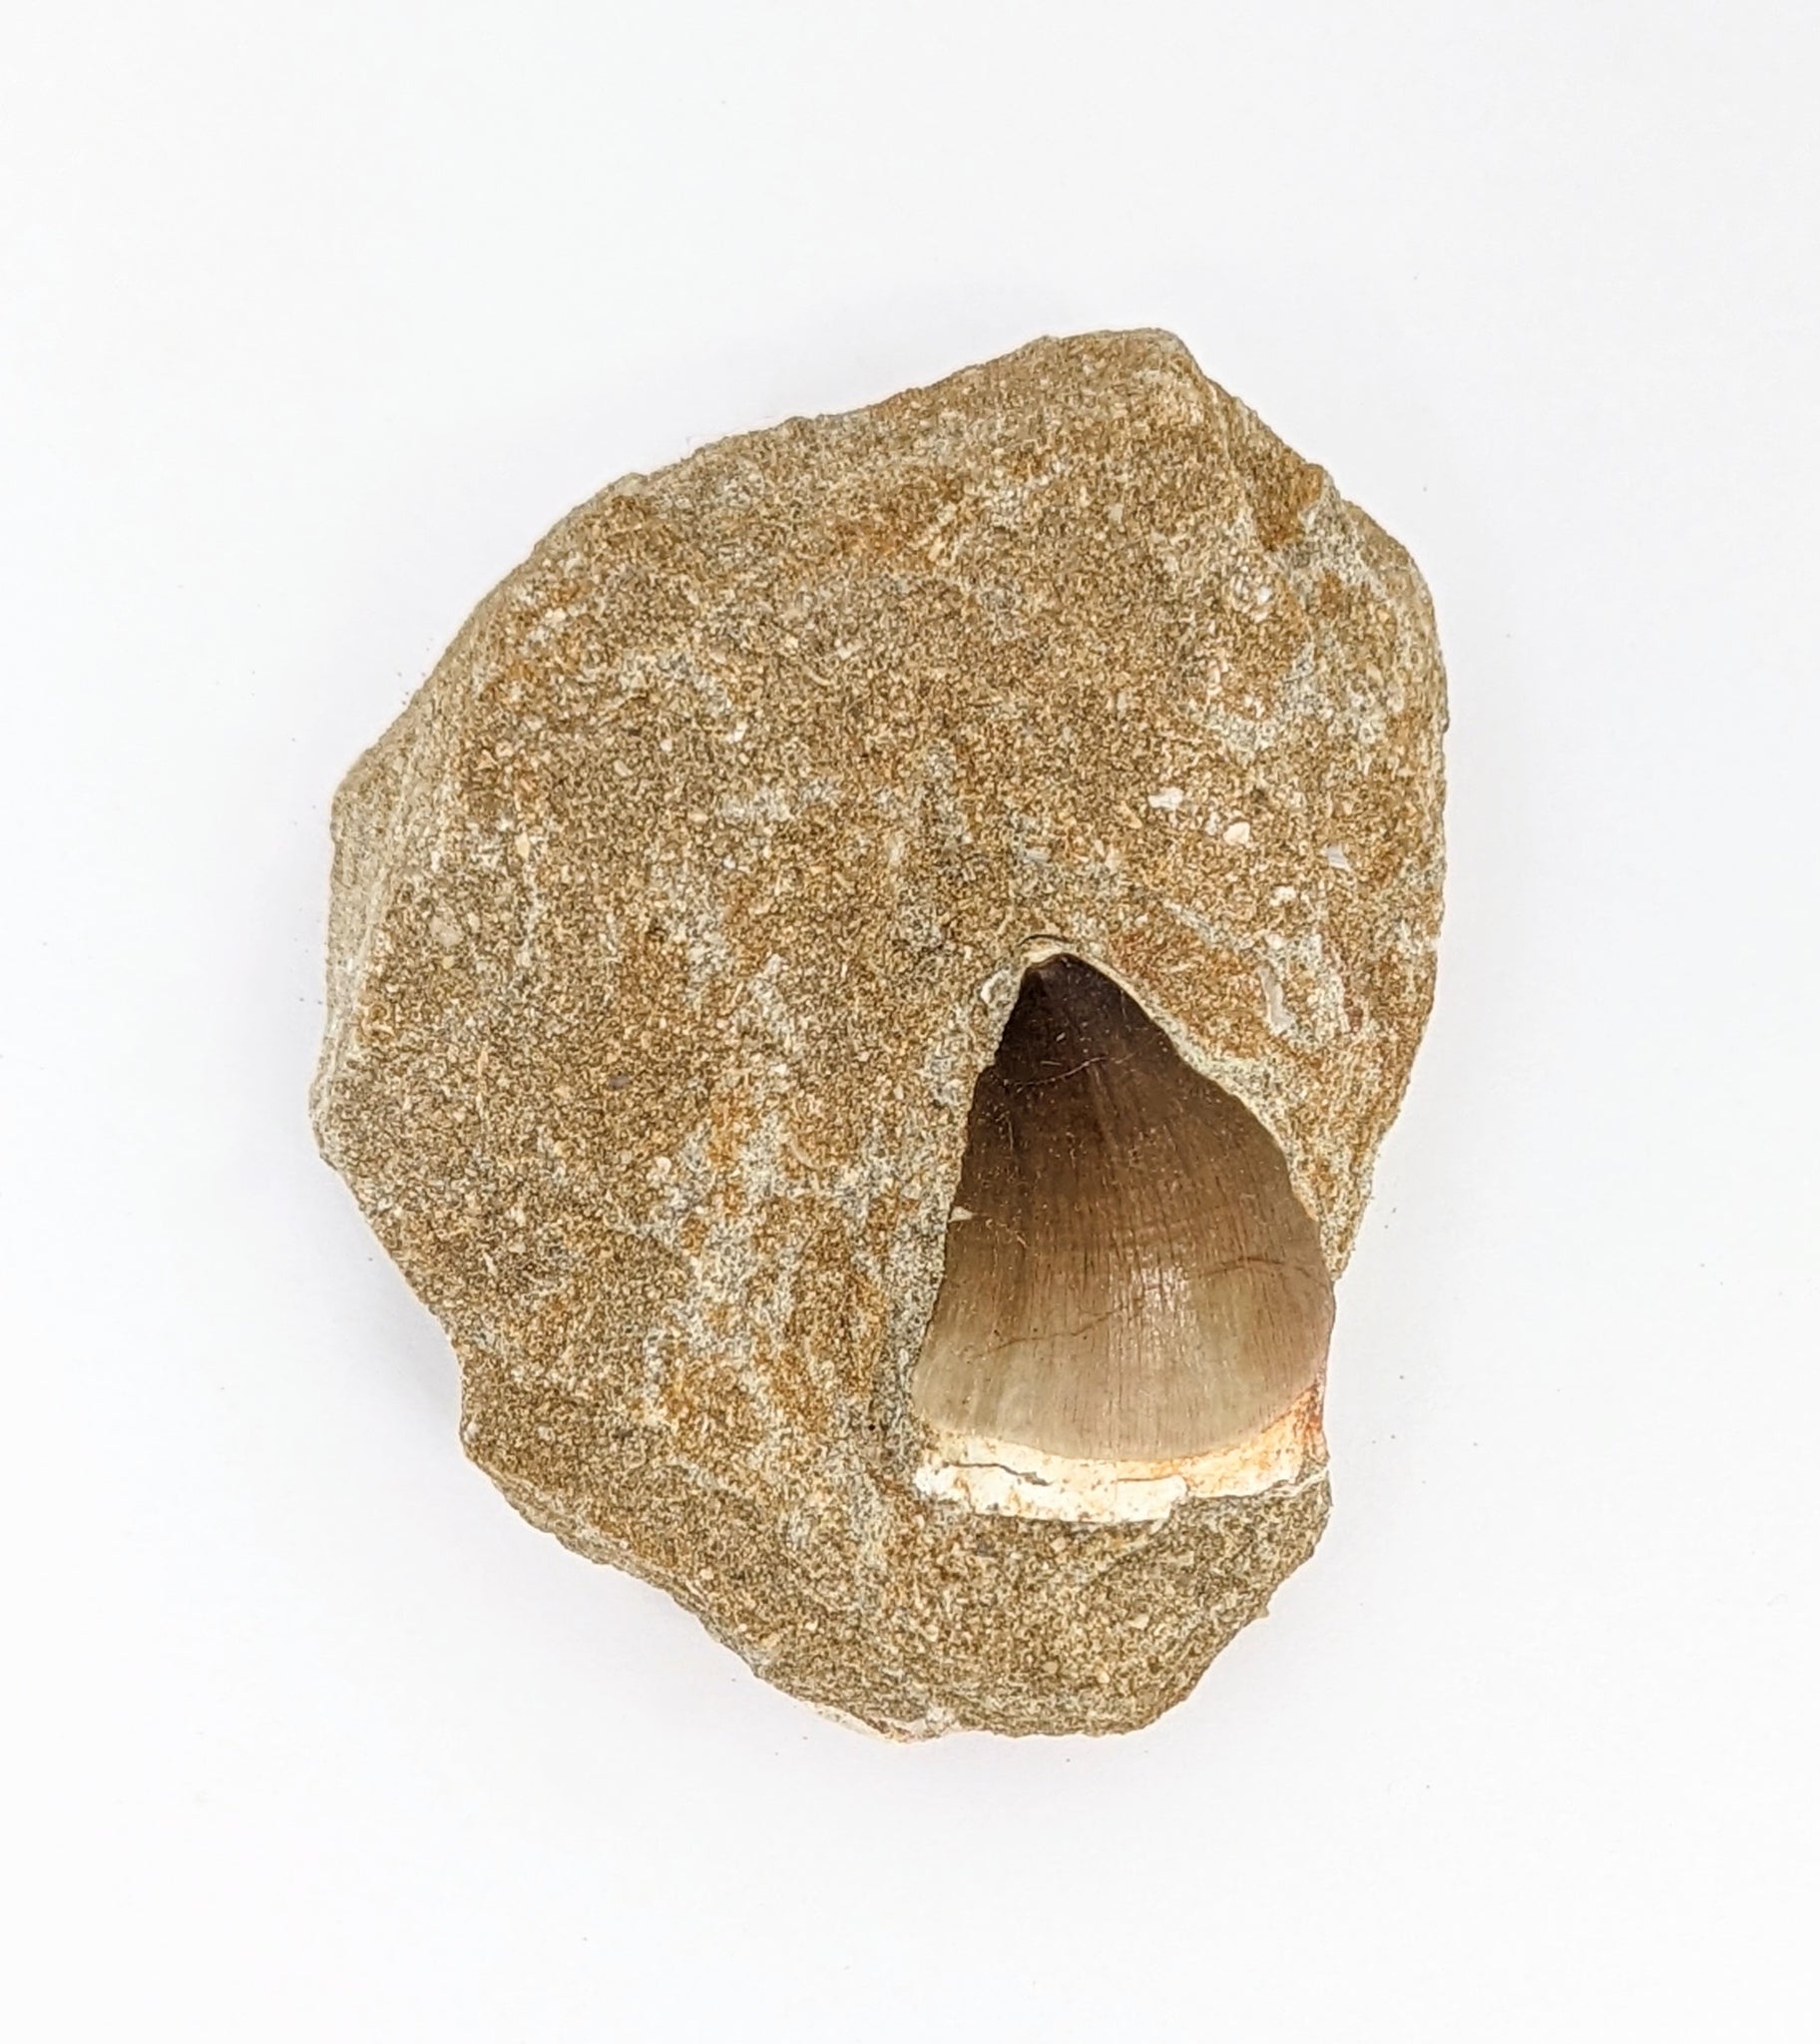 Mosasaur Fossil Tooth on Host Rock